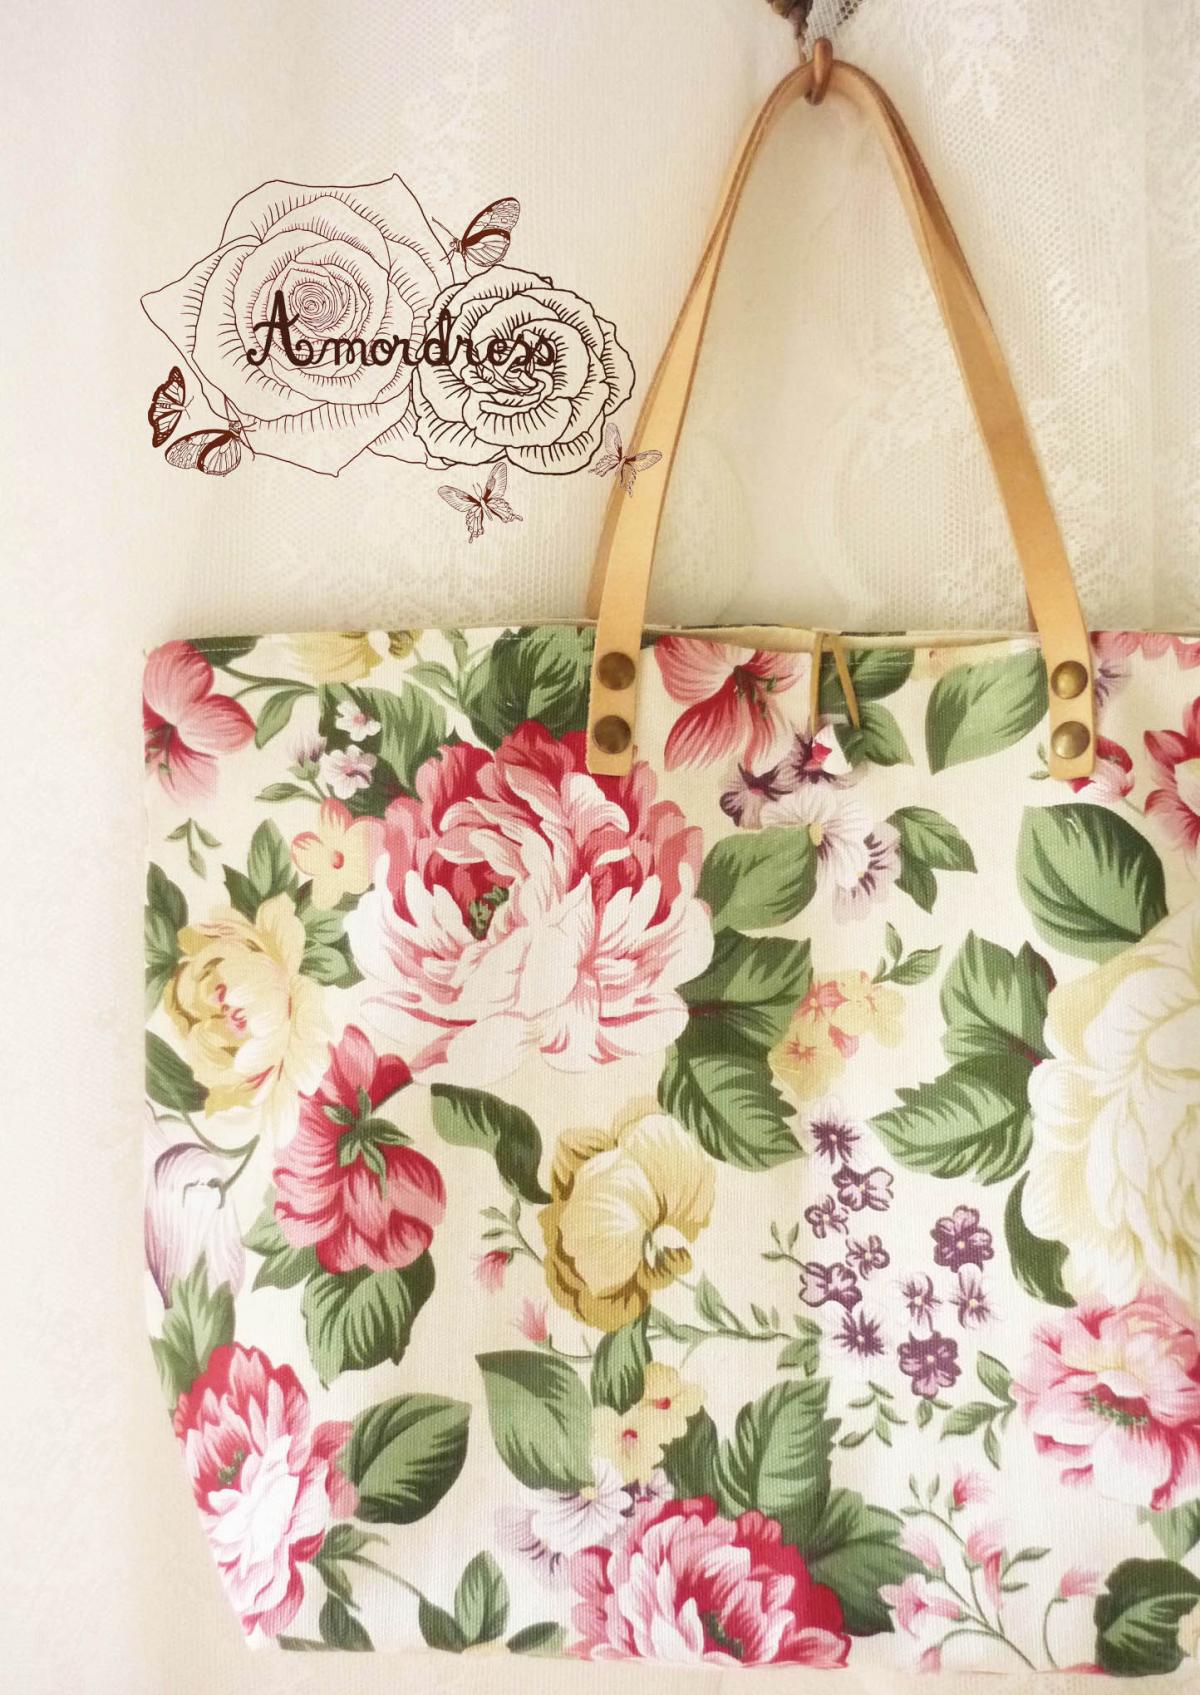 Floral Tote Bag Printed Canvas Bag Genuine Leather Strap White Cream with Floral Garden Shabby Chic Bag ...Amor The Inspired Collection...